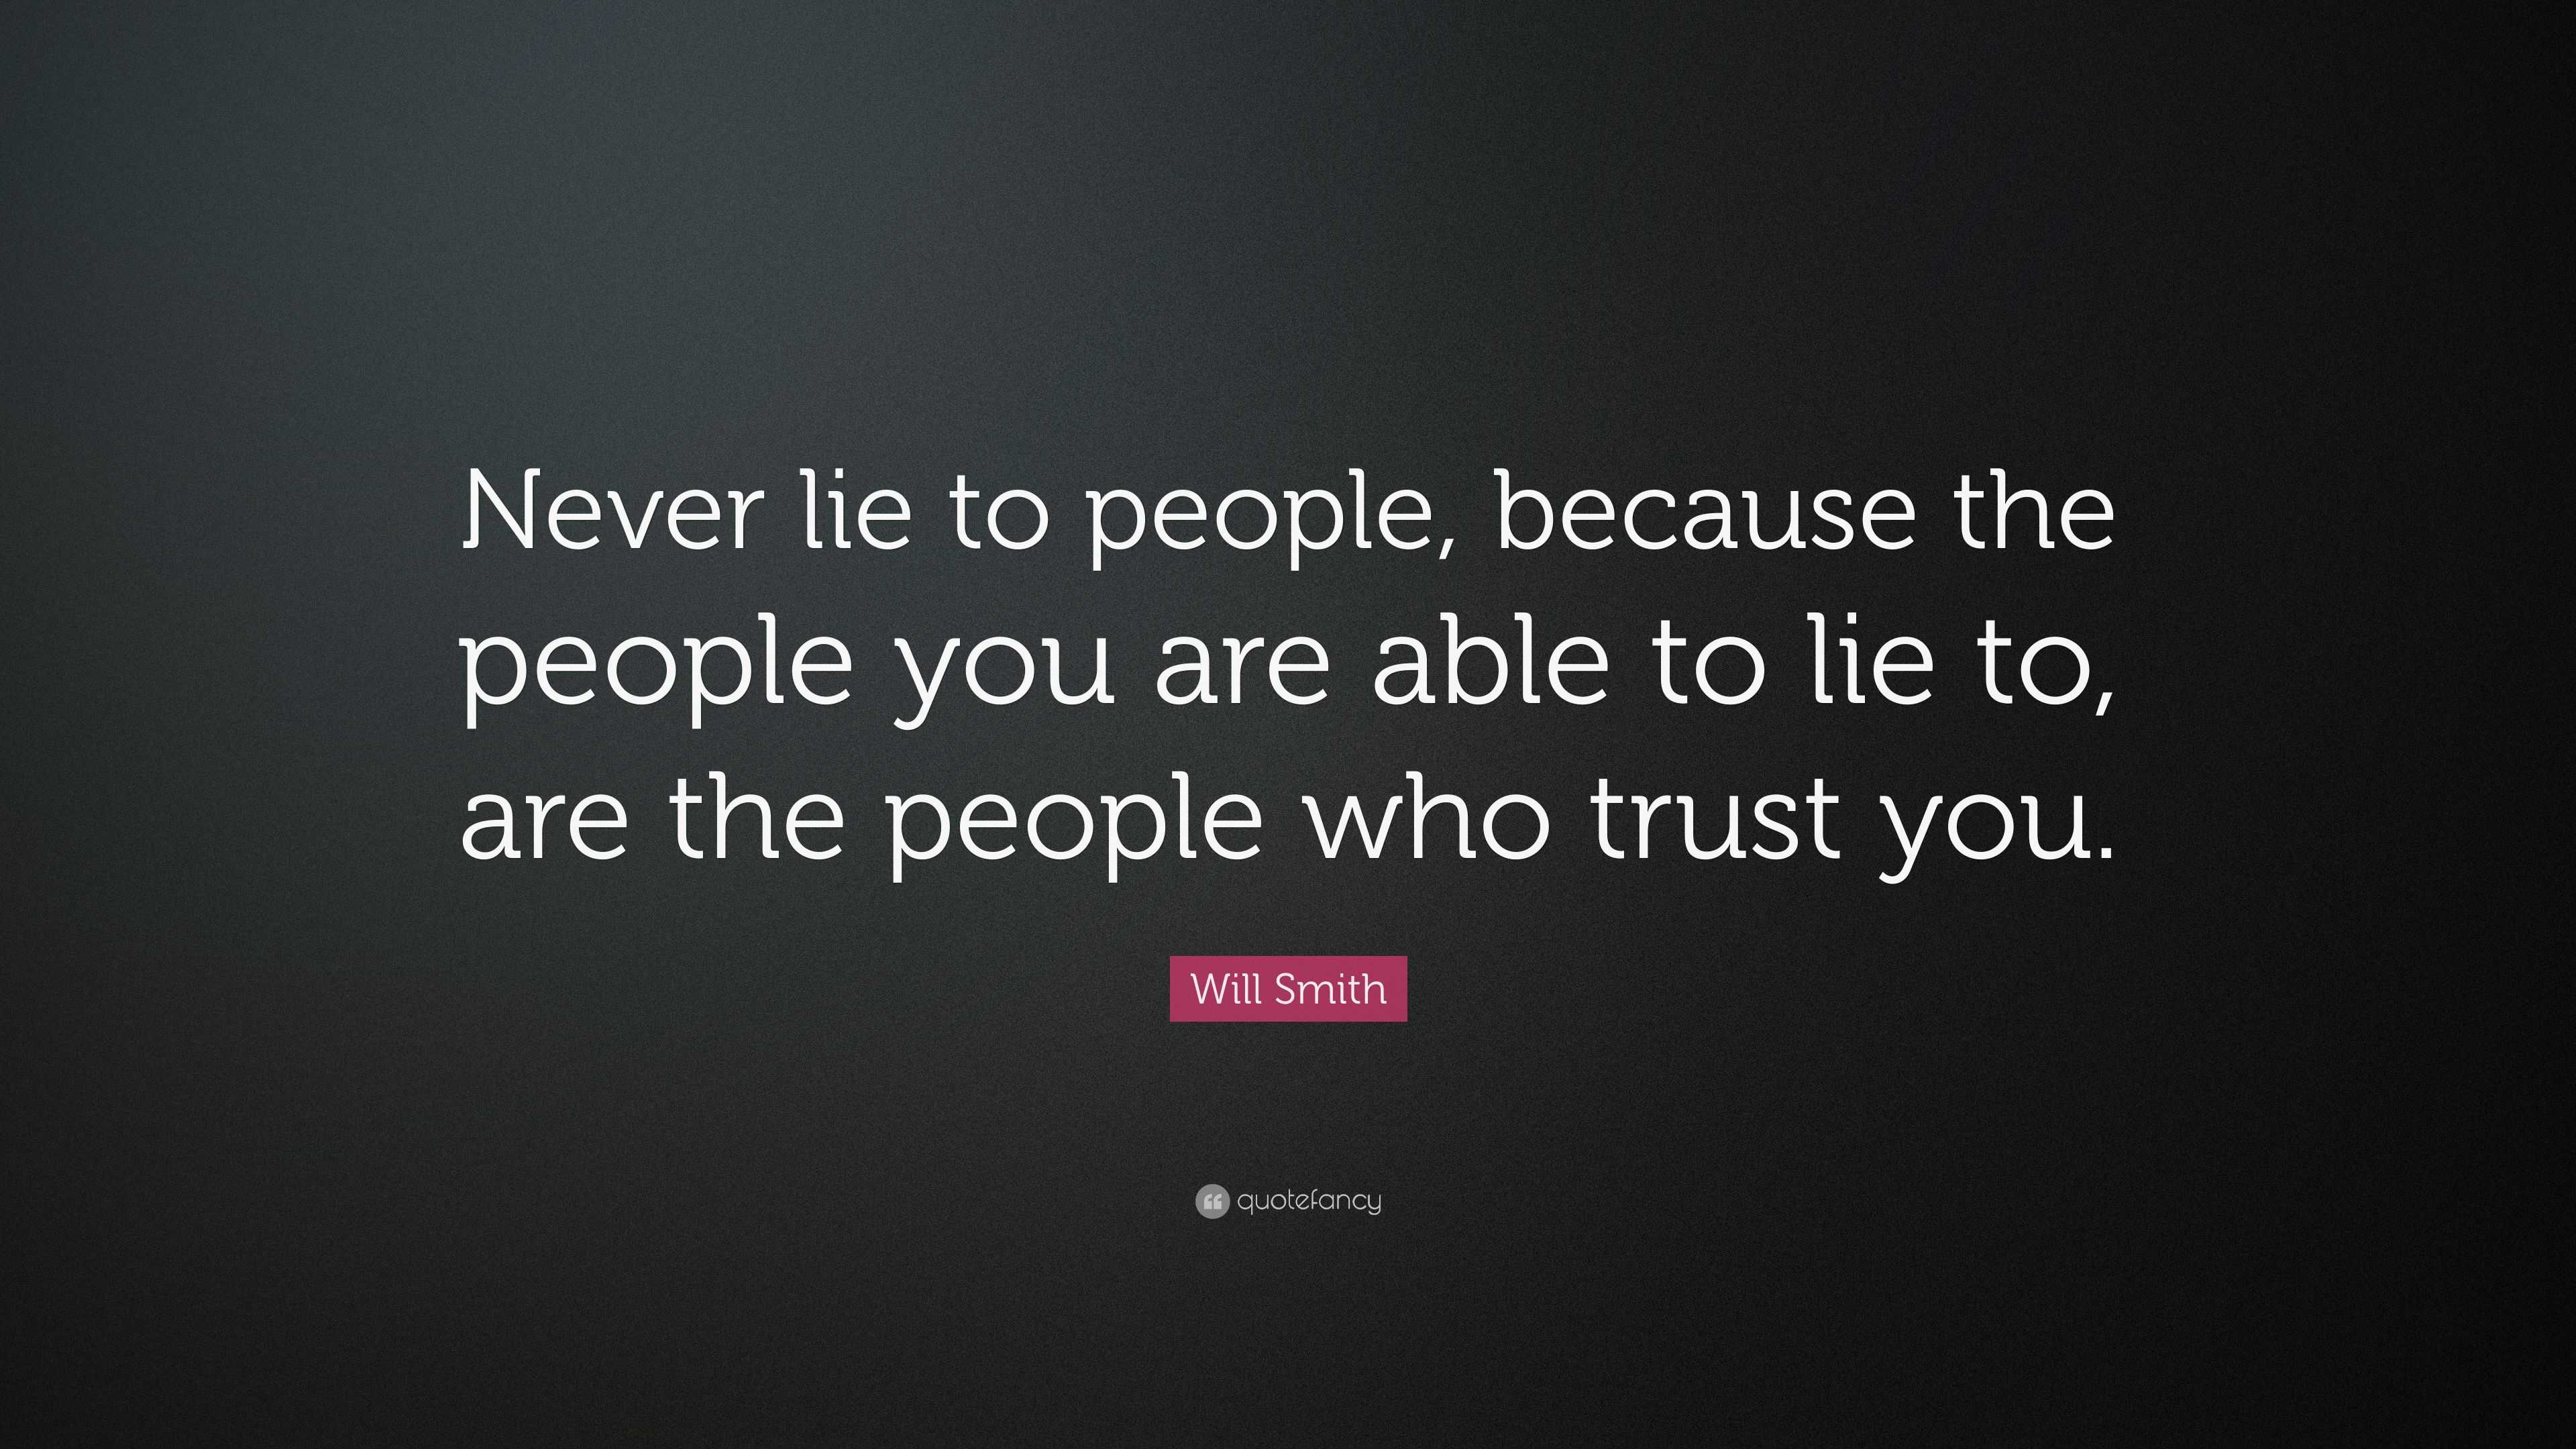 Will Smith Quote: “Never lie to people, because the people you are able ...